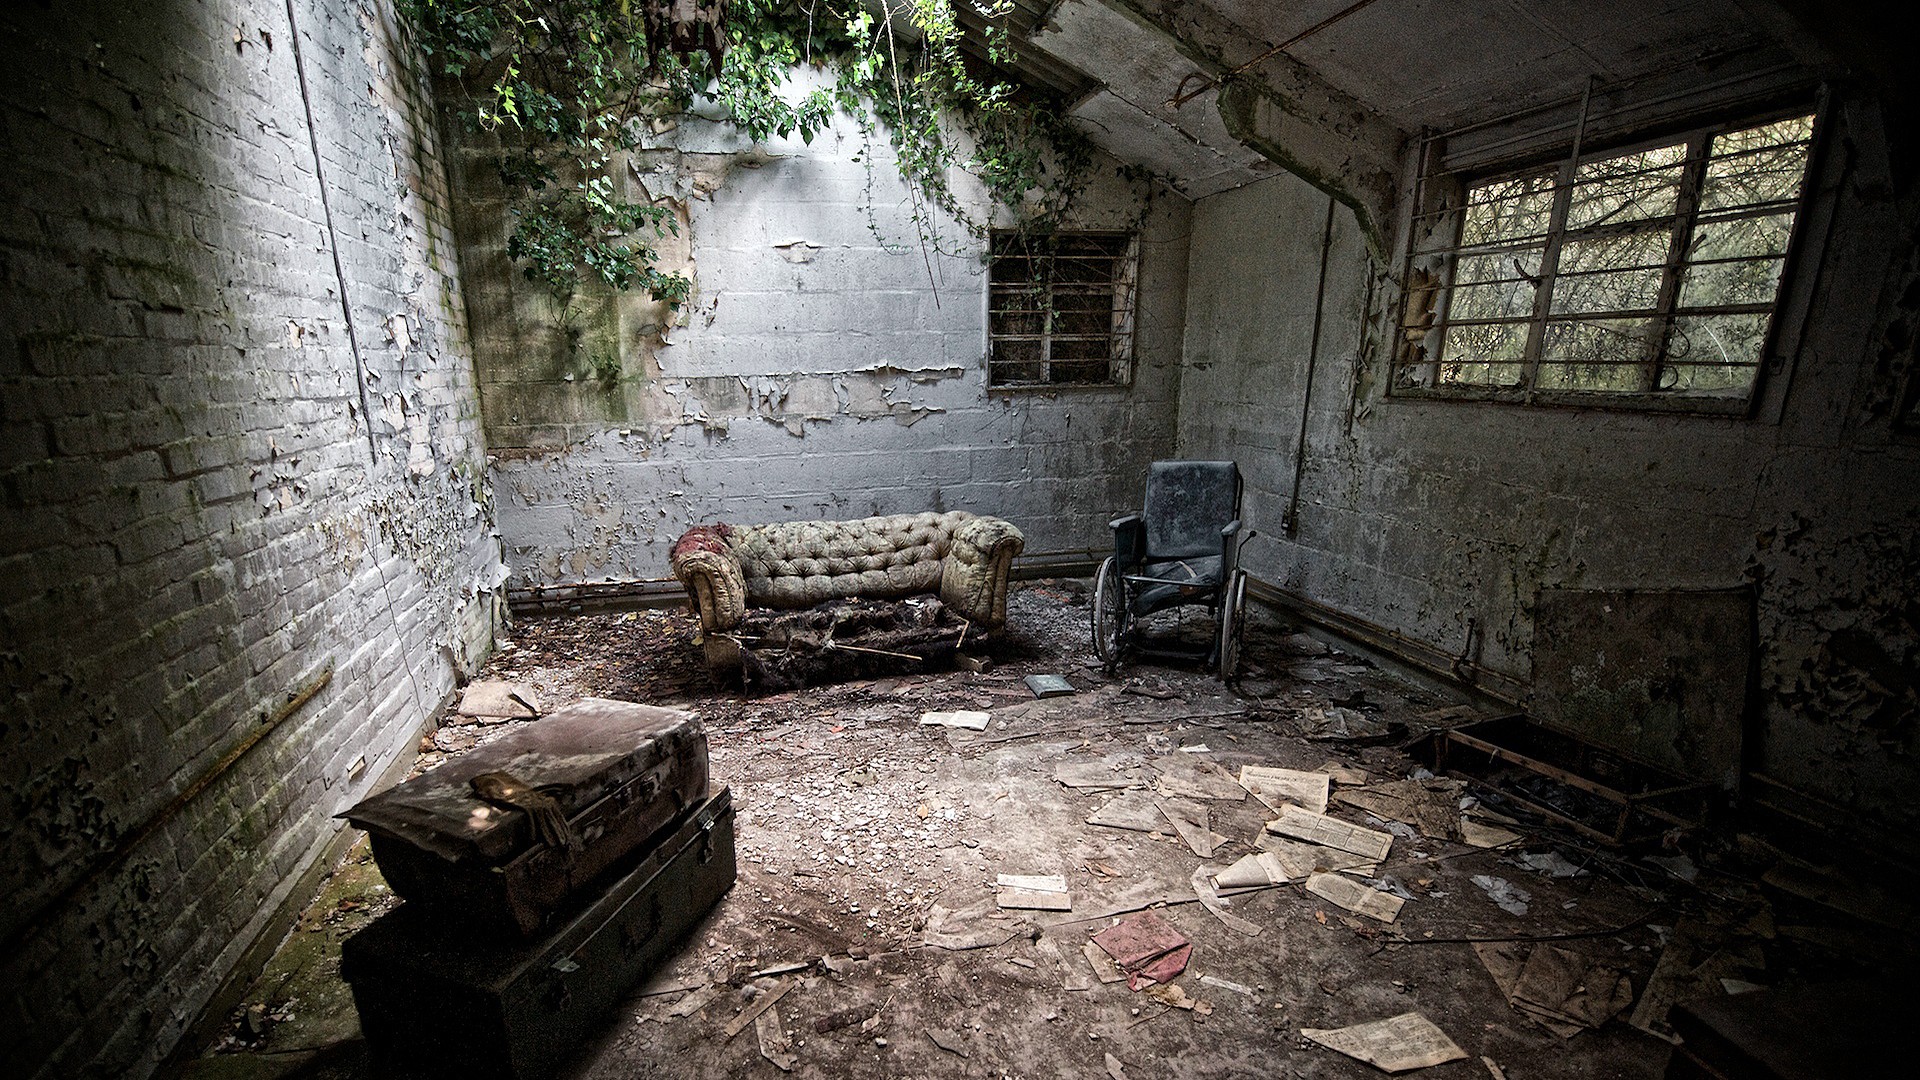 General 1920x1080 building old building abandoned ruins house interior desolate